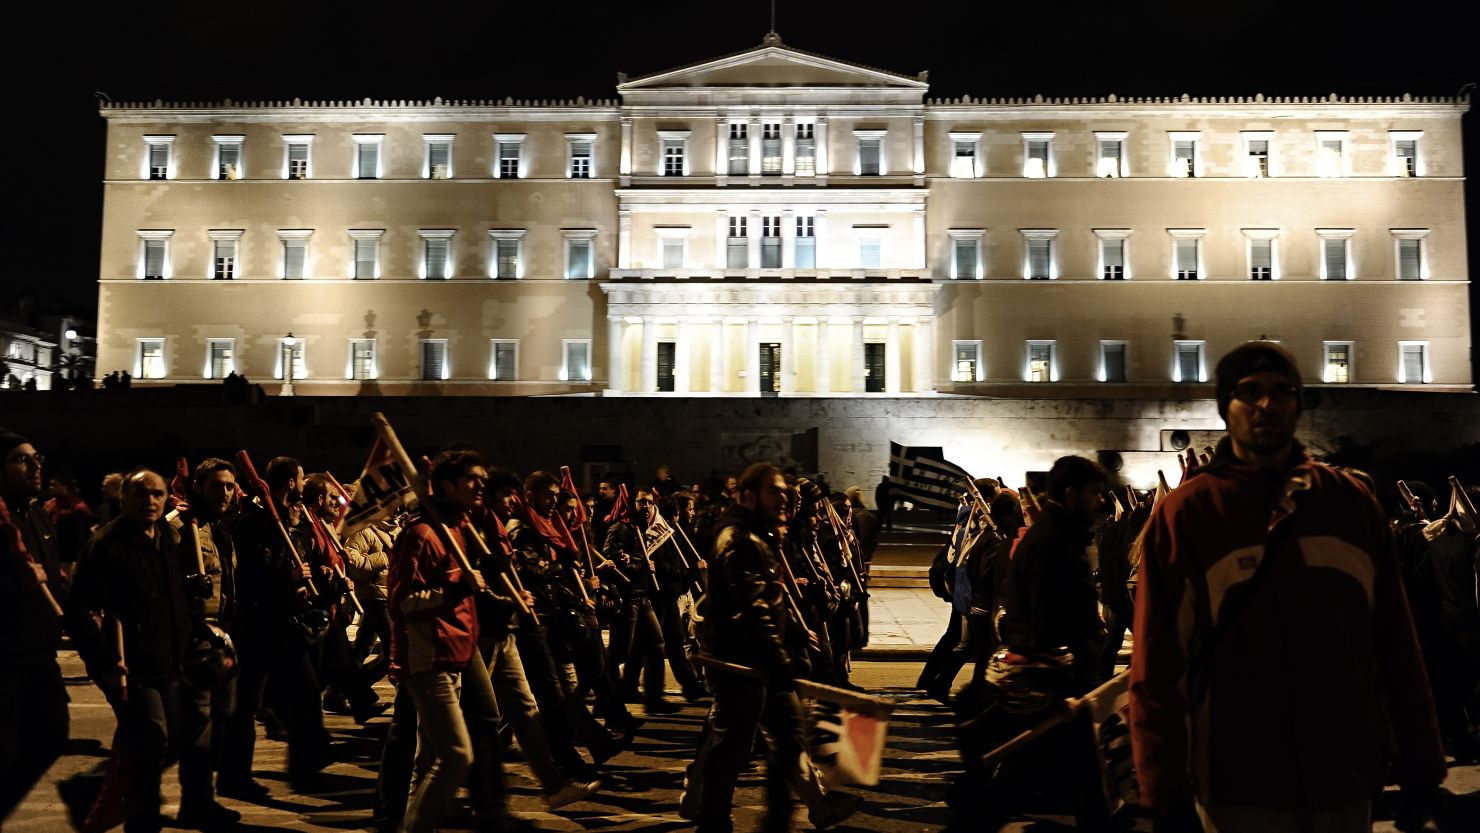 Protesters march against austerity cuts Thursday in front of the Greek Parliament in Athens.